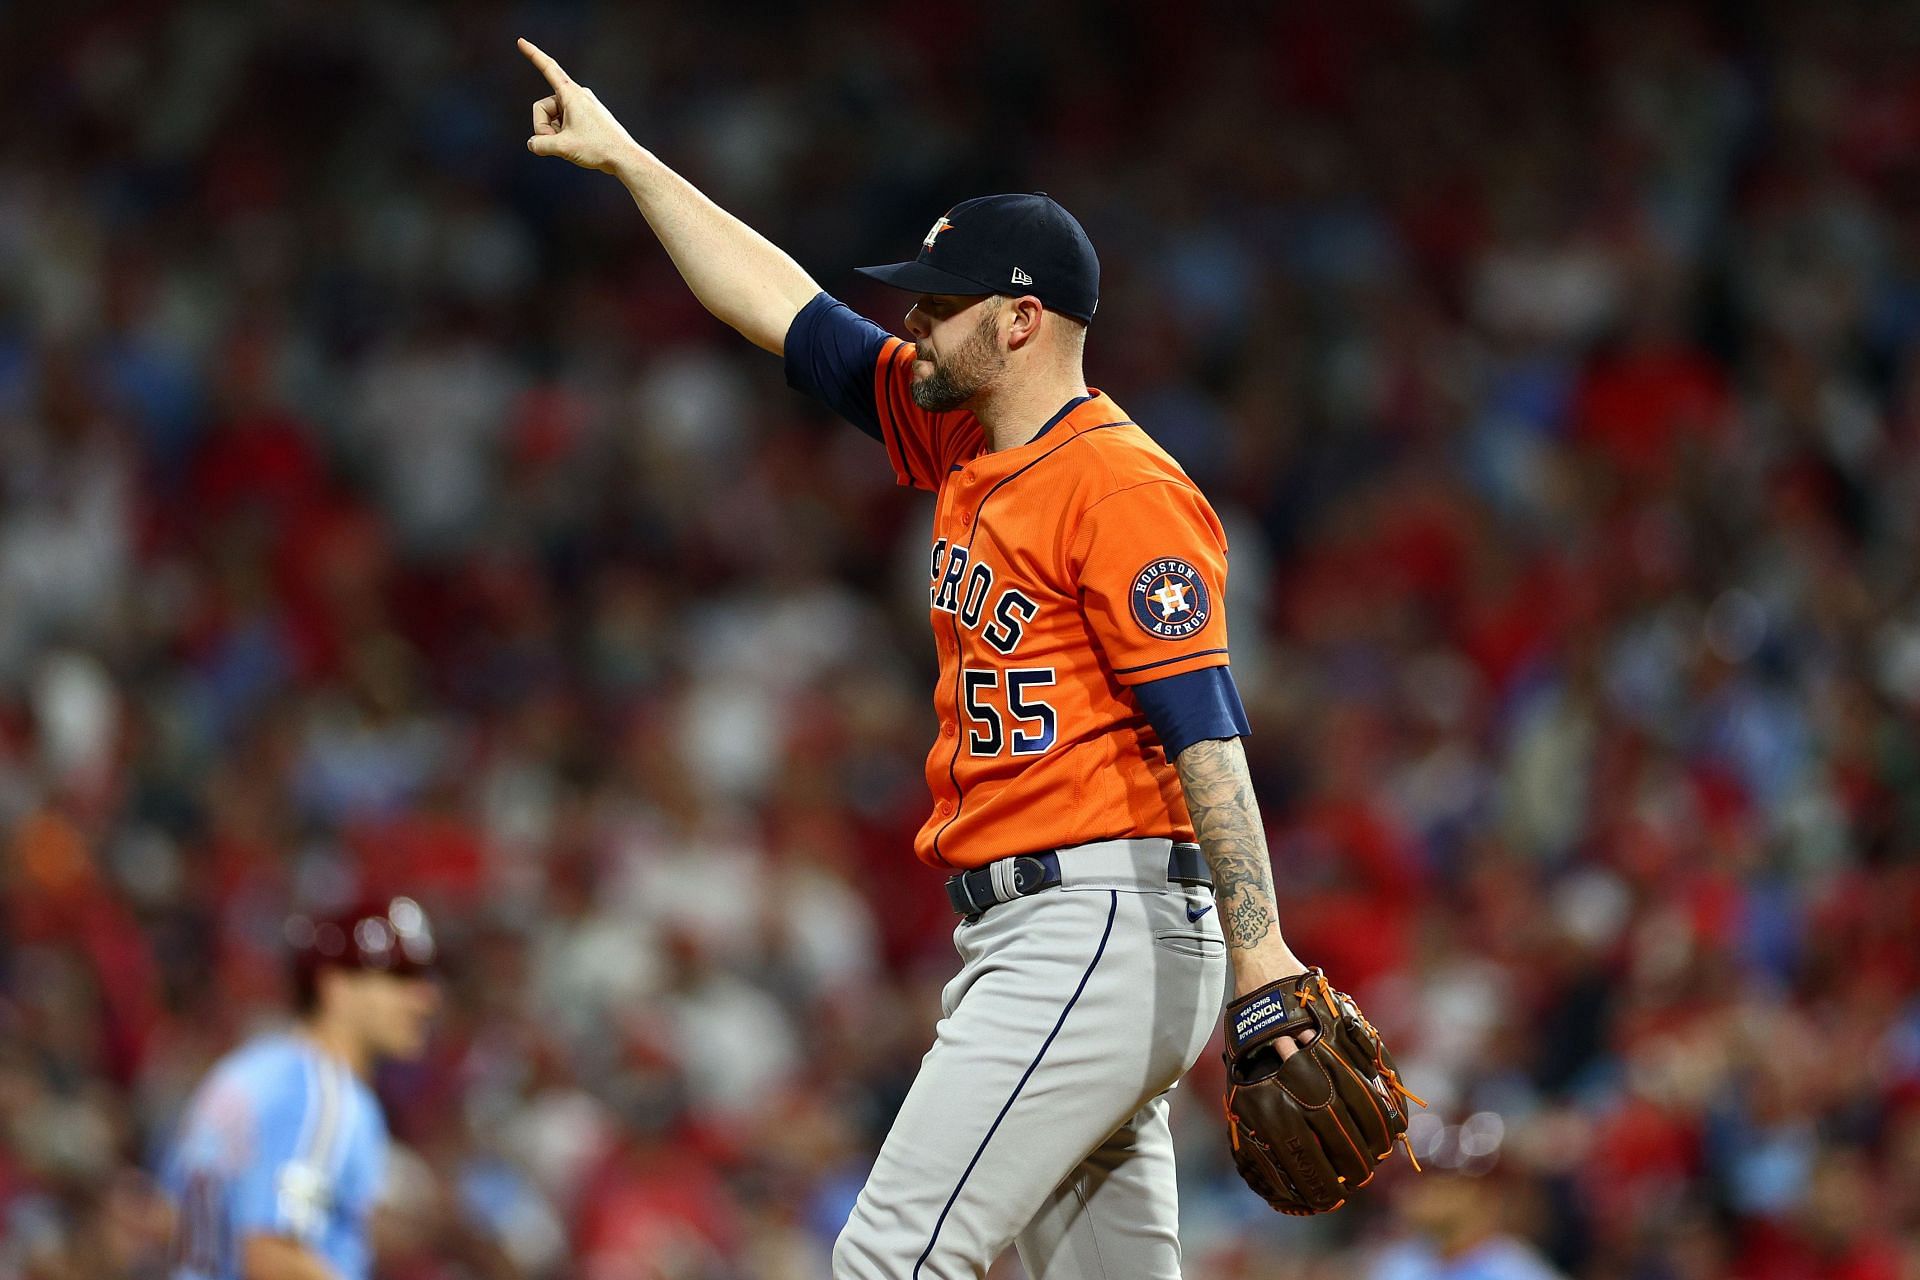 Houston Astros pitcher Ryan Pressly commits to Team USA for World